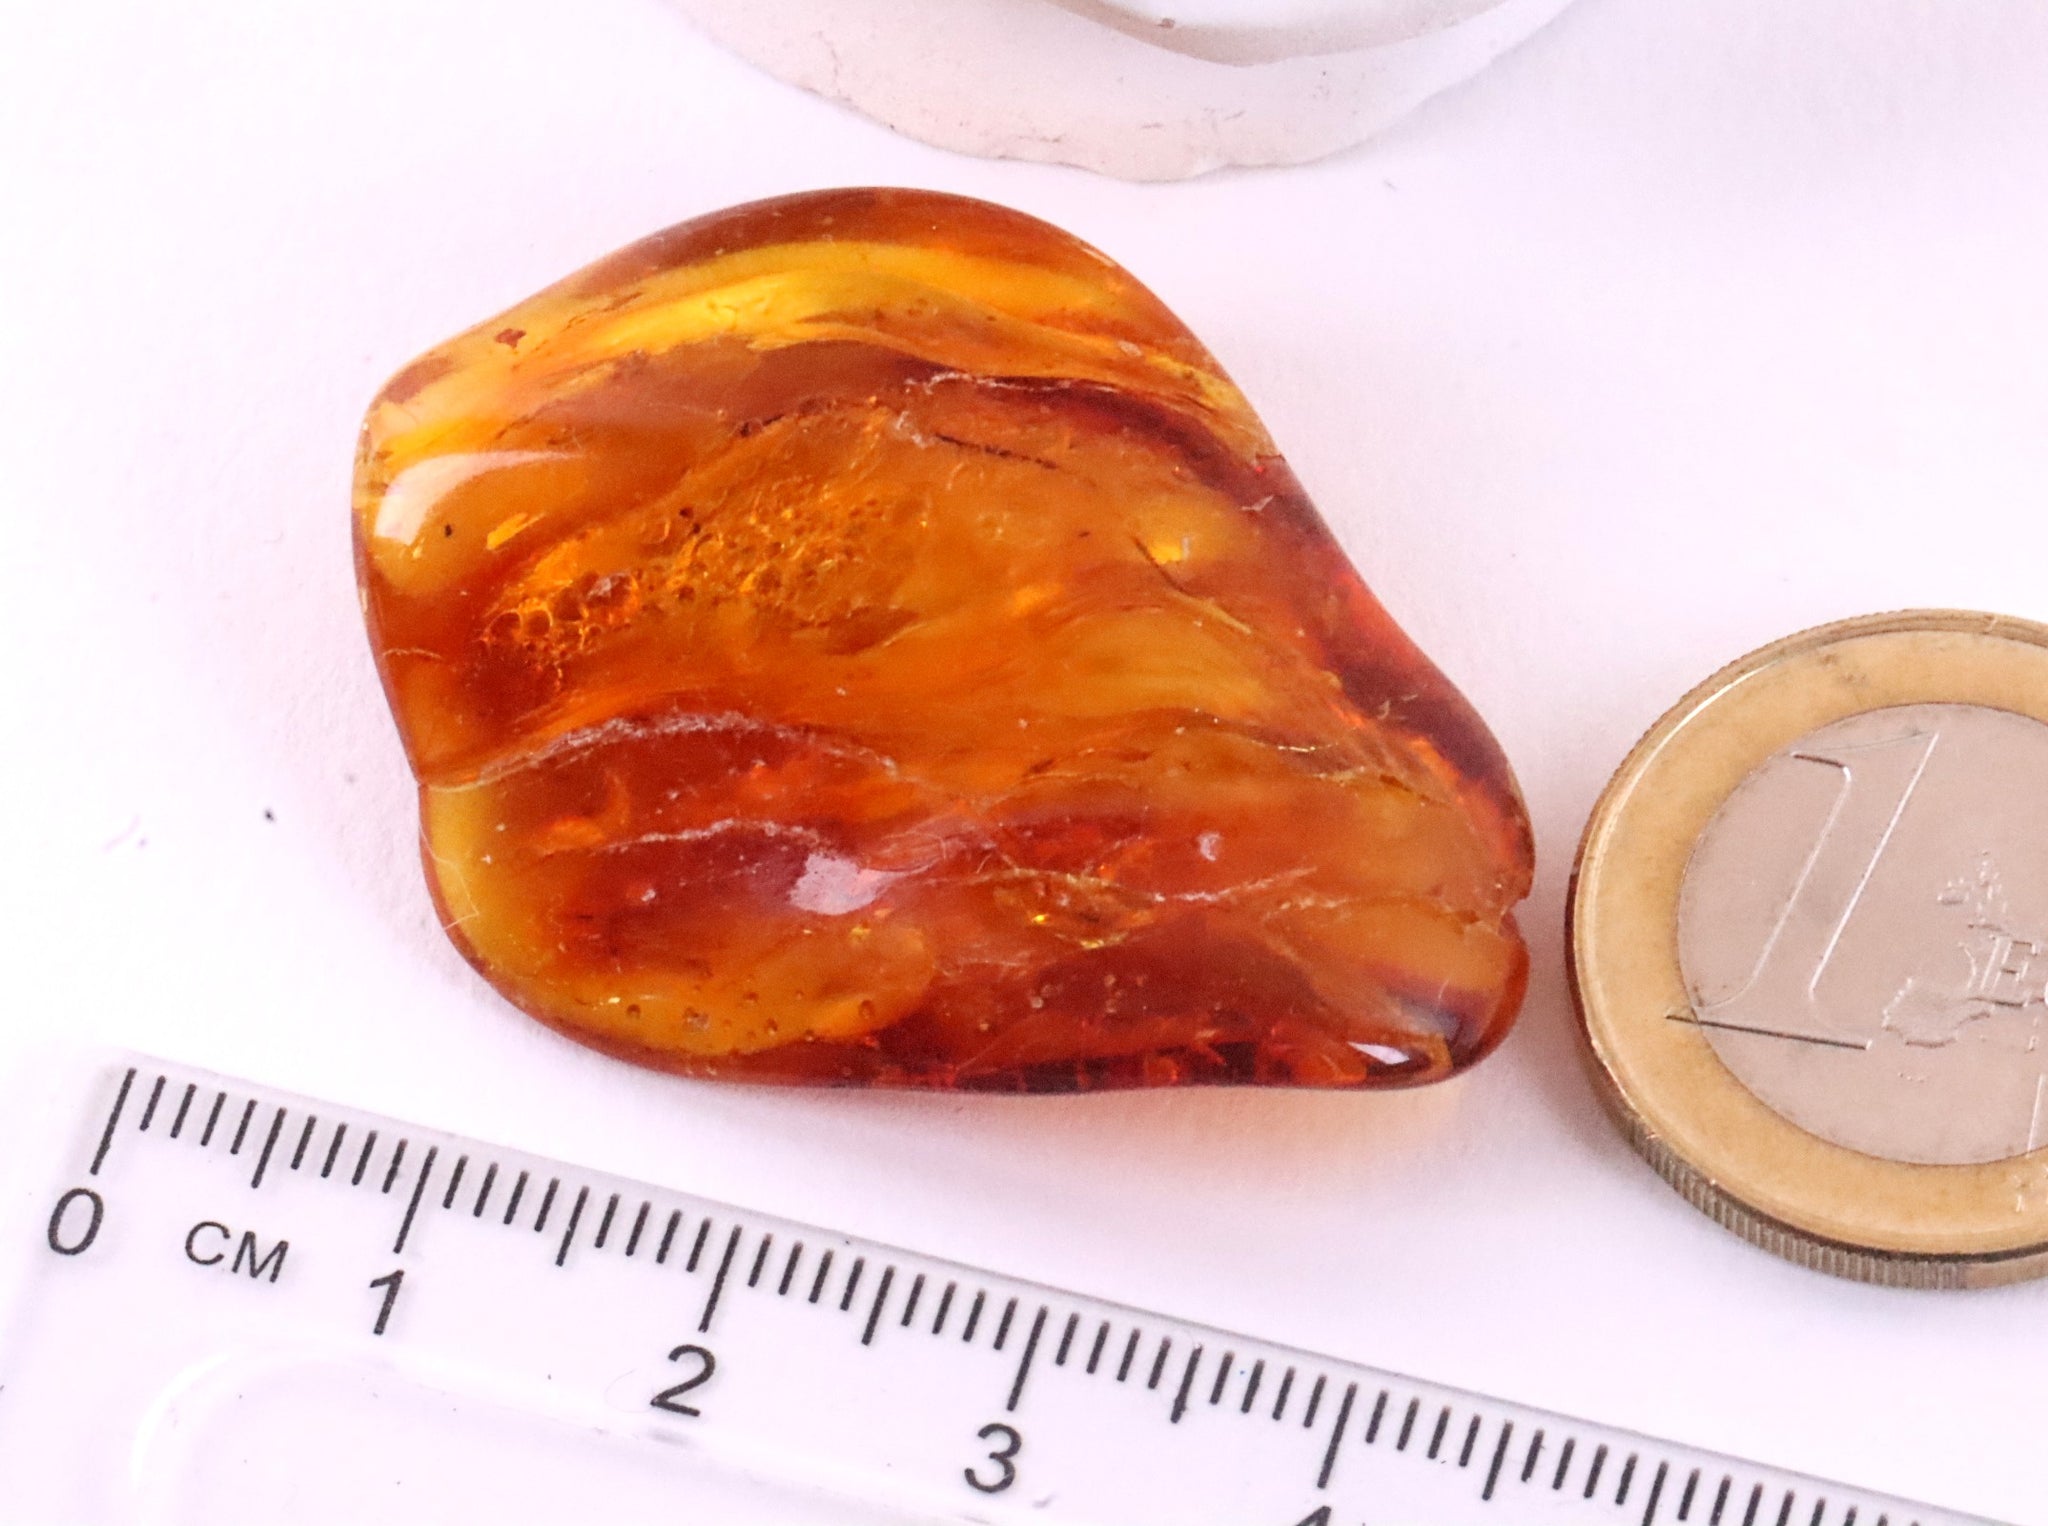 Inclusion in Baltic Amber